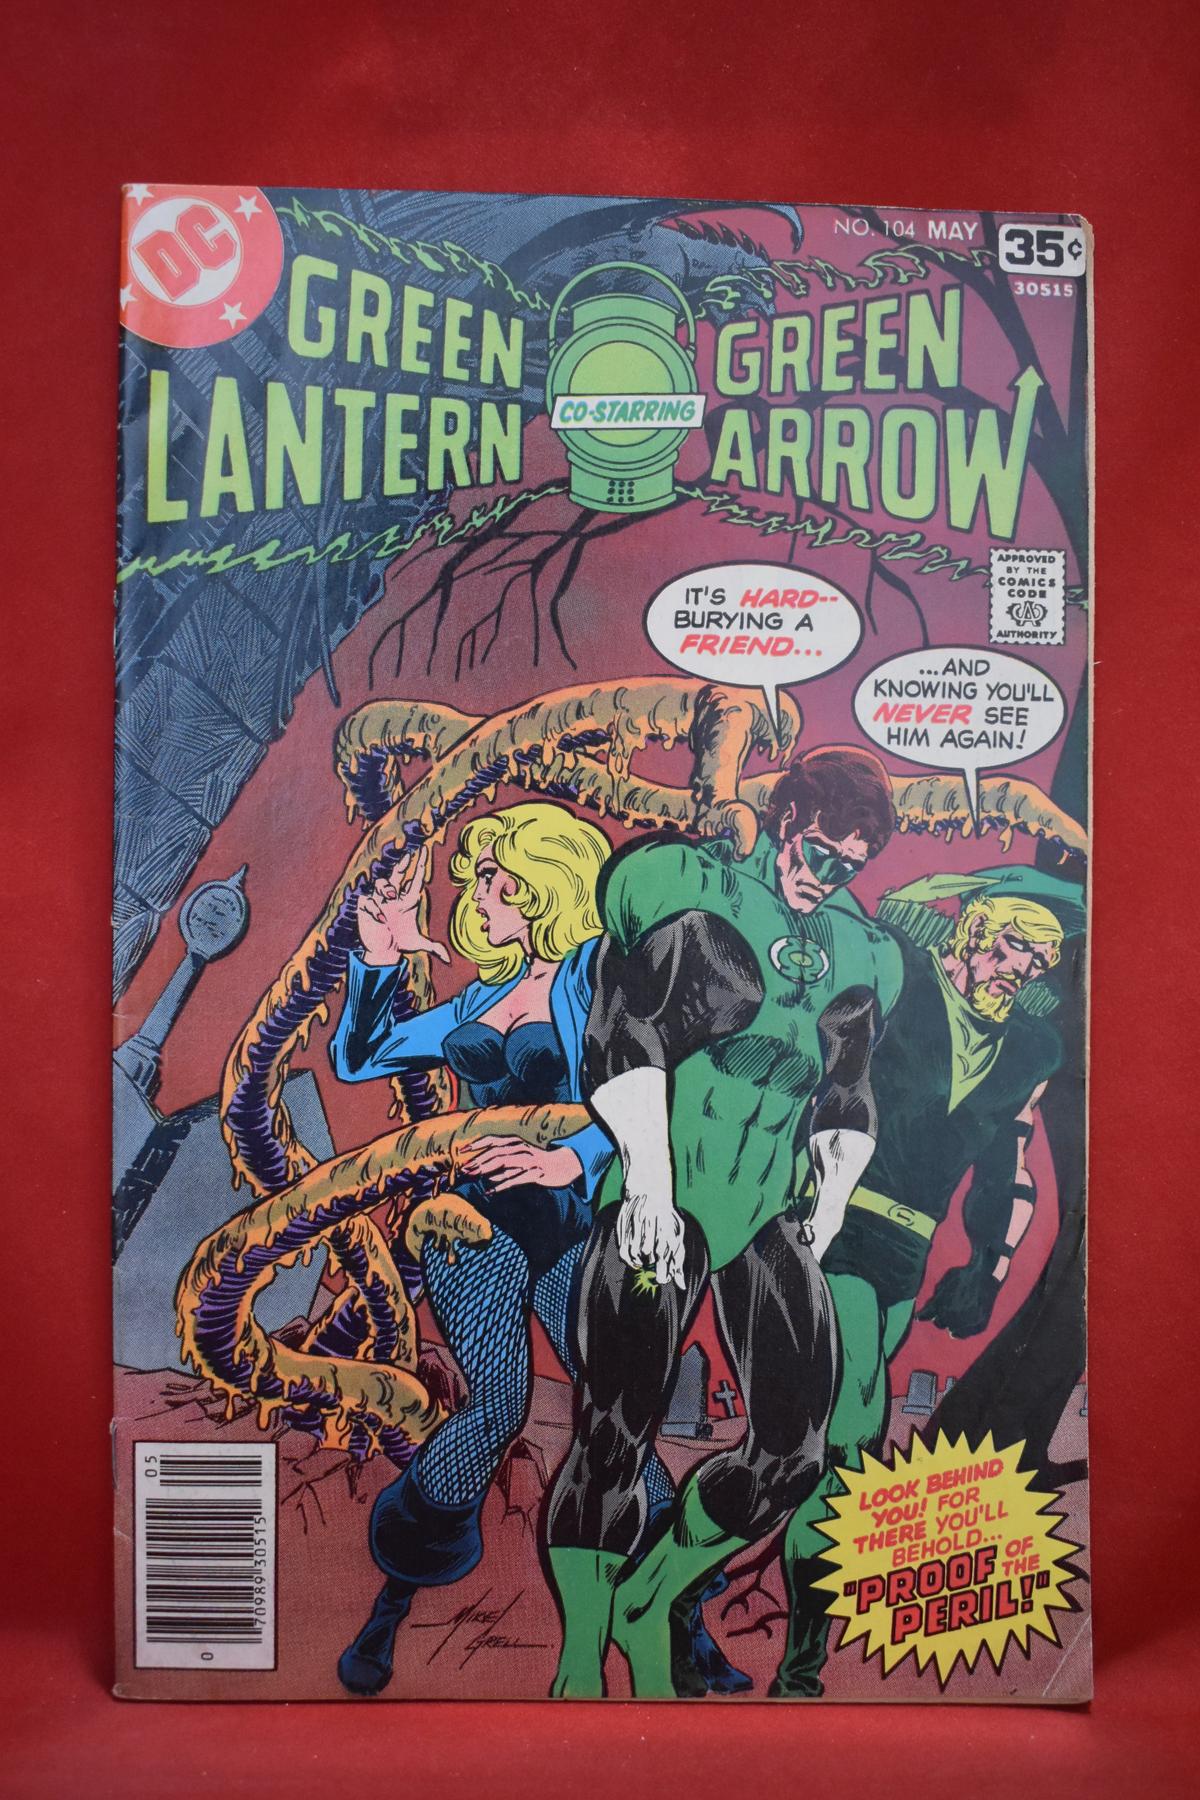 GREEN LANTERN #104 | PROOF OF PERIL! | MIKE GRELL - 1978